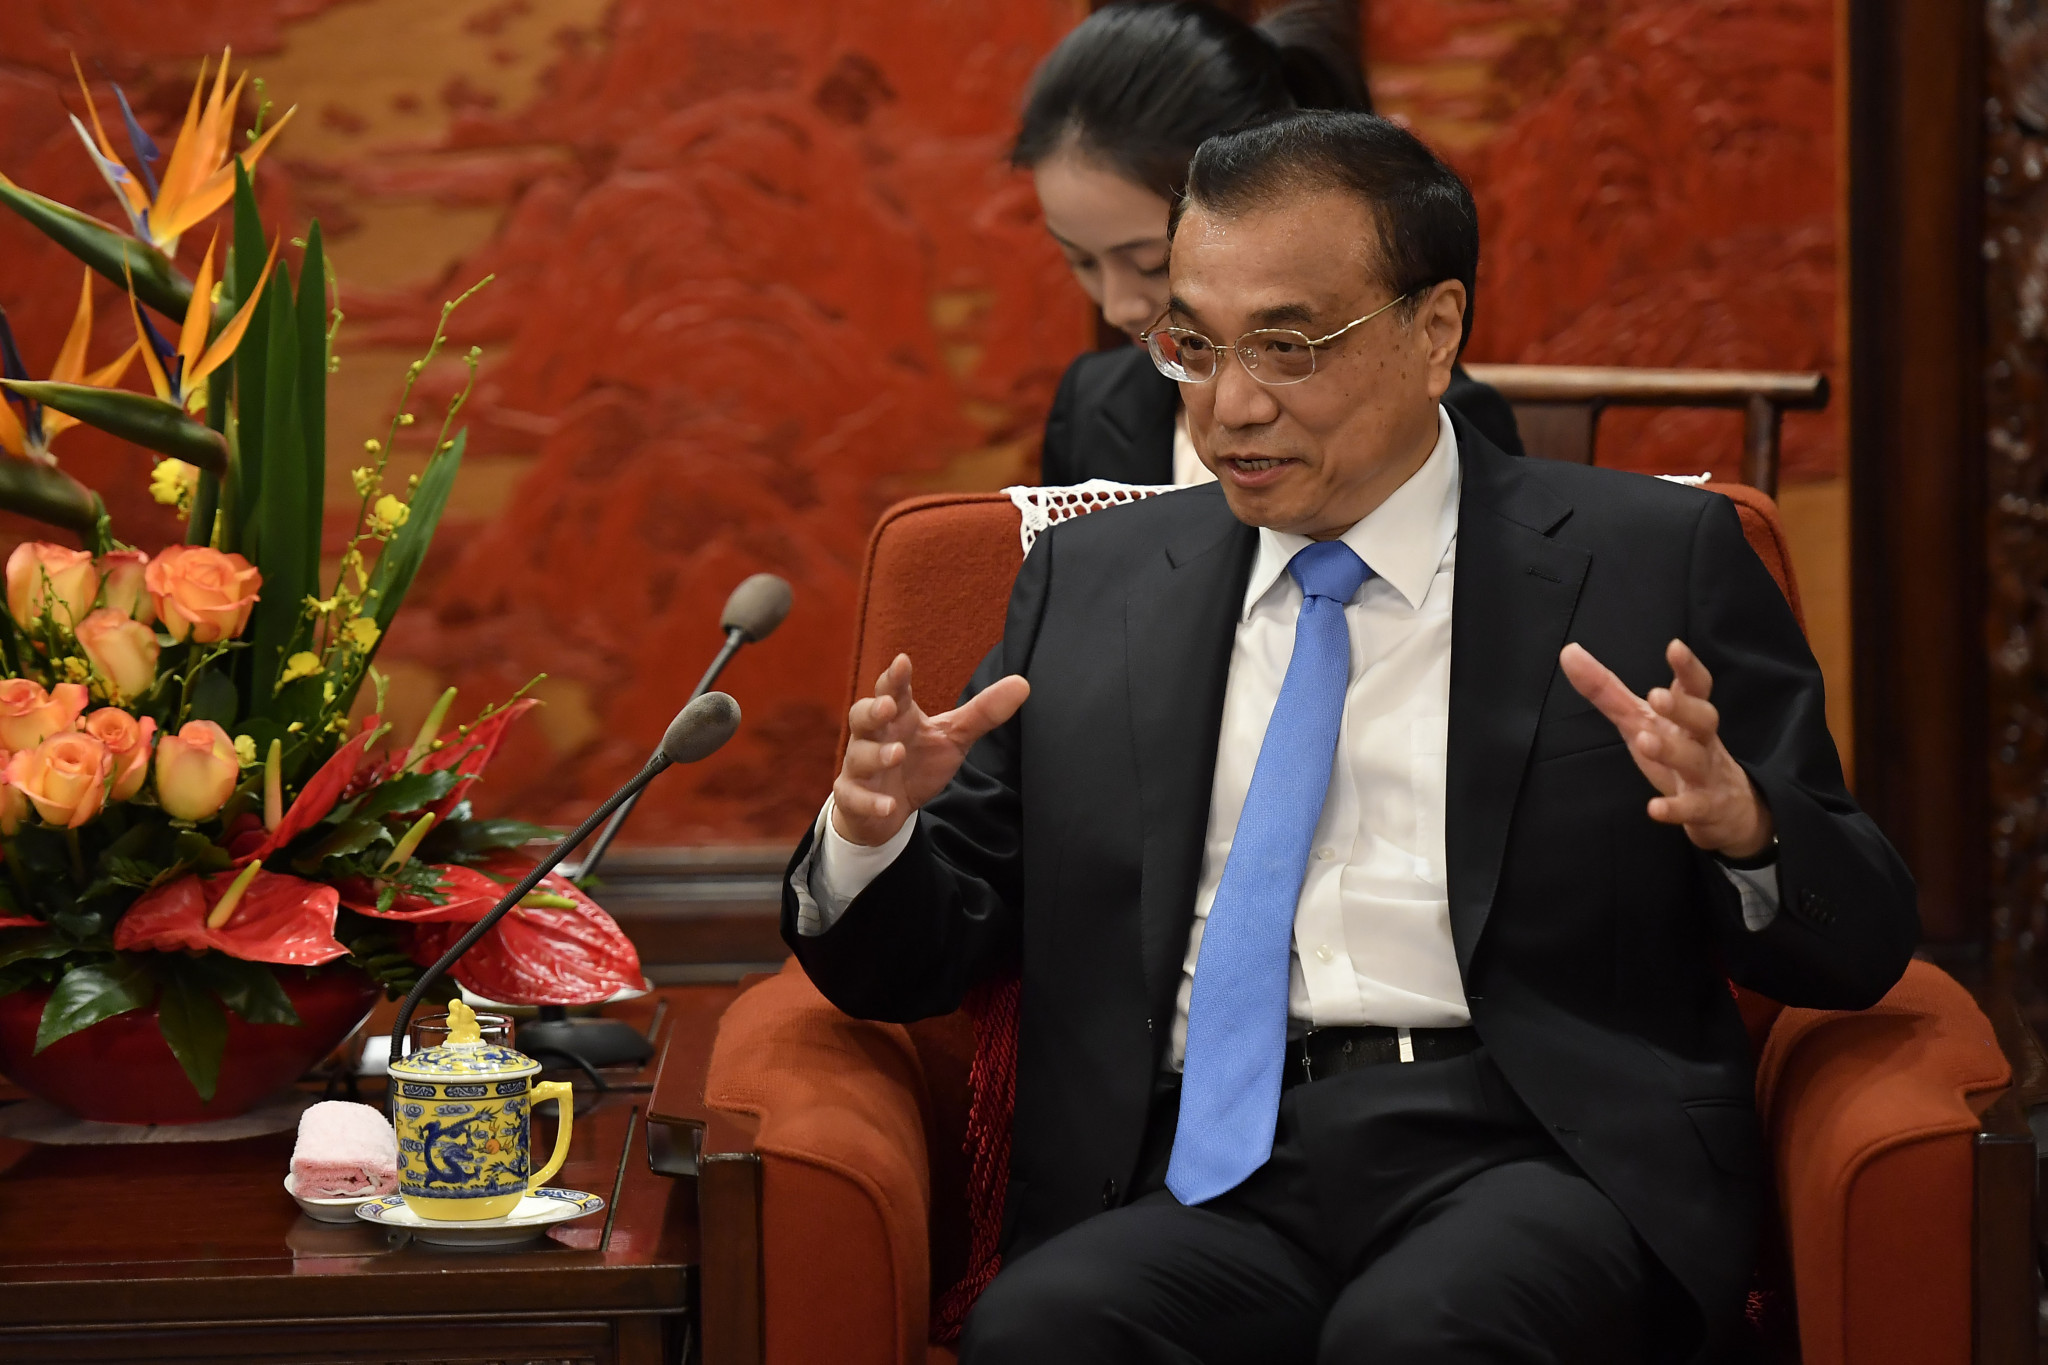 The talks are part of preparations for Chinese Premier Li Keqiang’s scheduled visit to Japan in May ©Getty Images